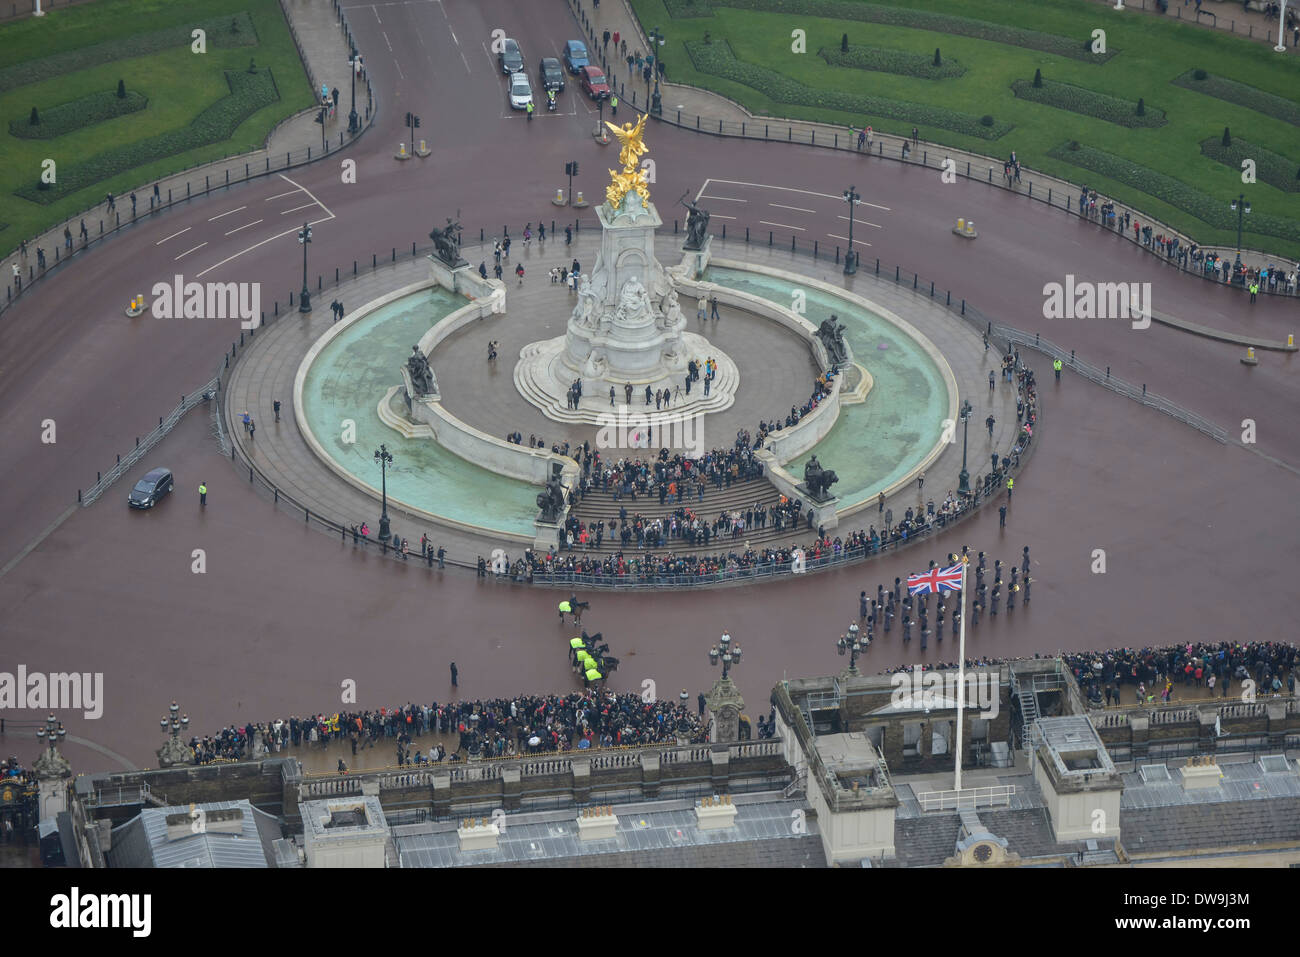 Aerial Photograph showing crowds in front of the Victoria Memorial at Buckingham Palace, London, United Kingdom Stock Photo